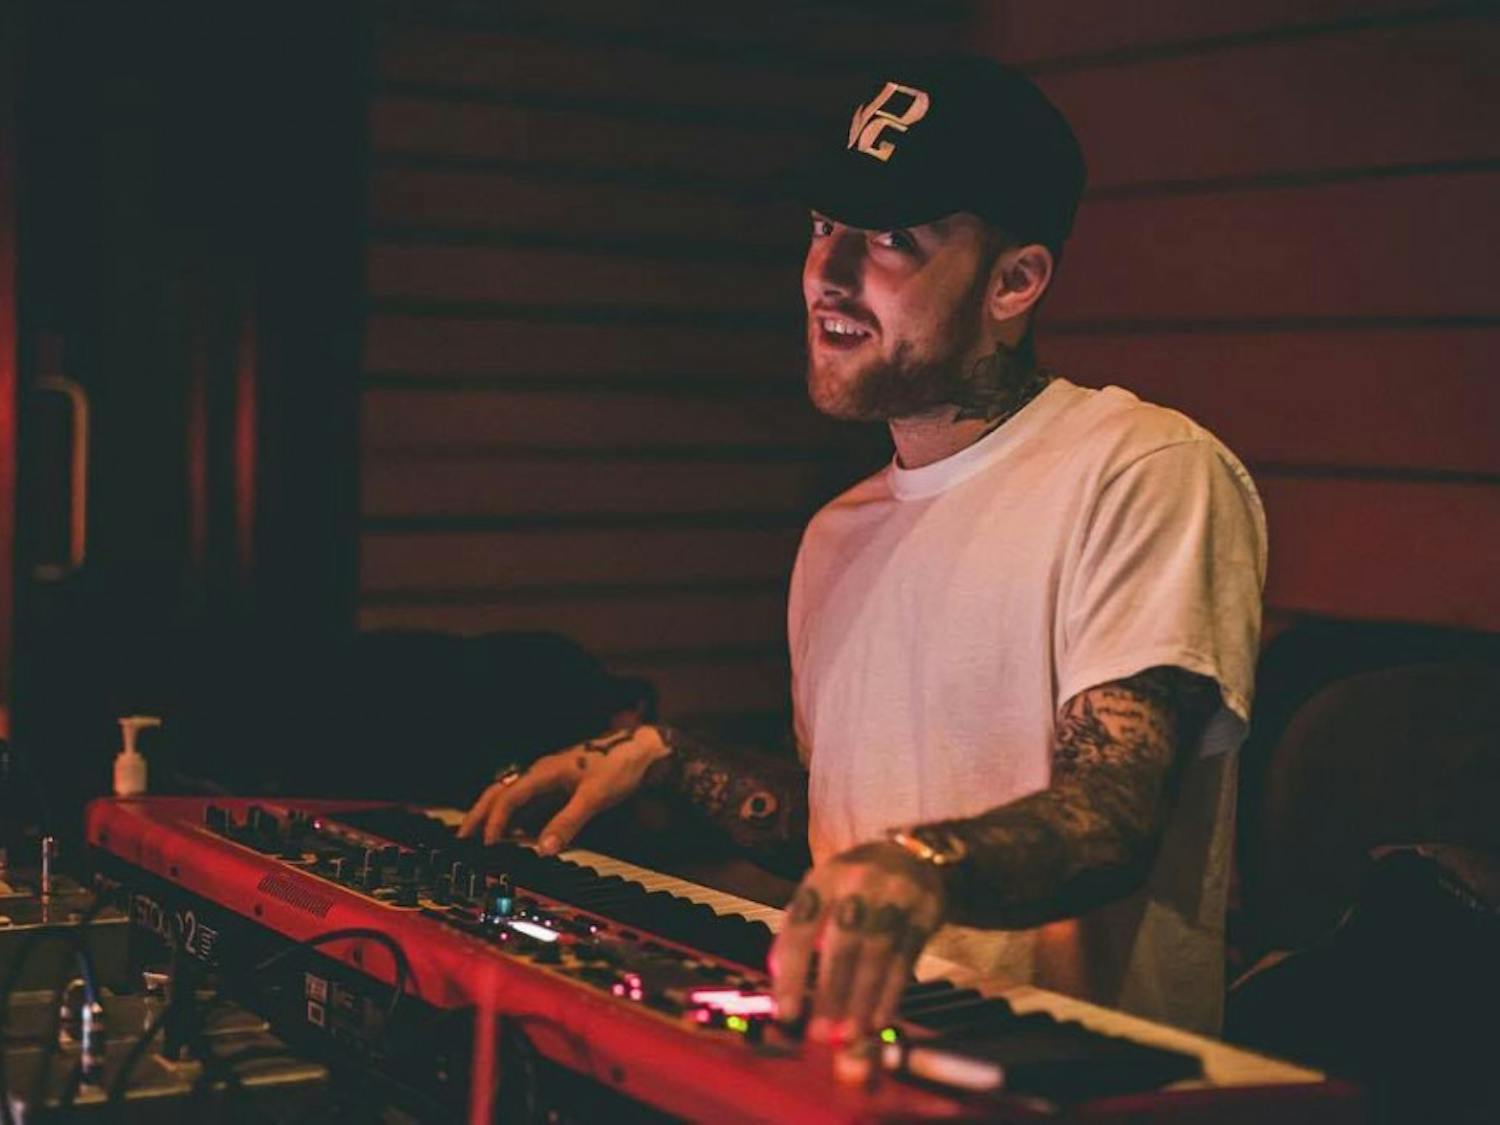 Mac Miller died Friday in his Los Angeles home. He was 26.